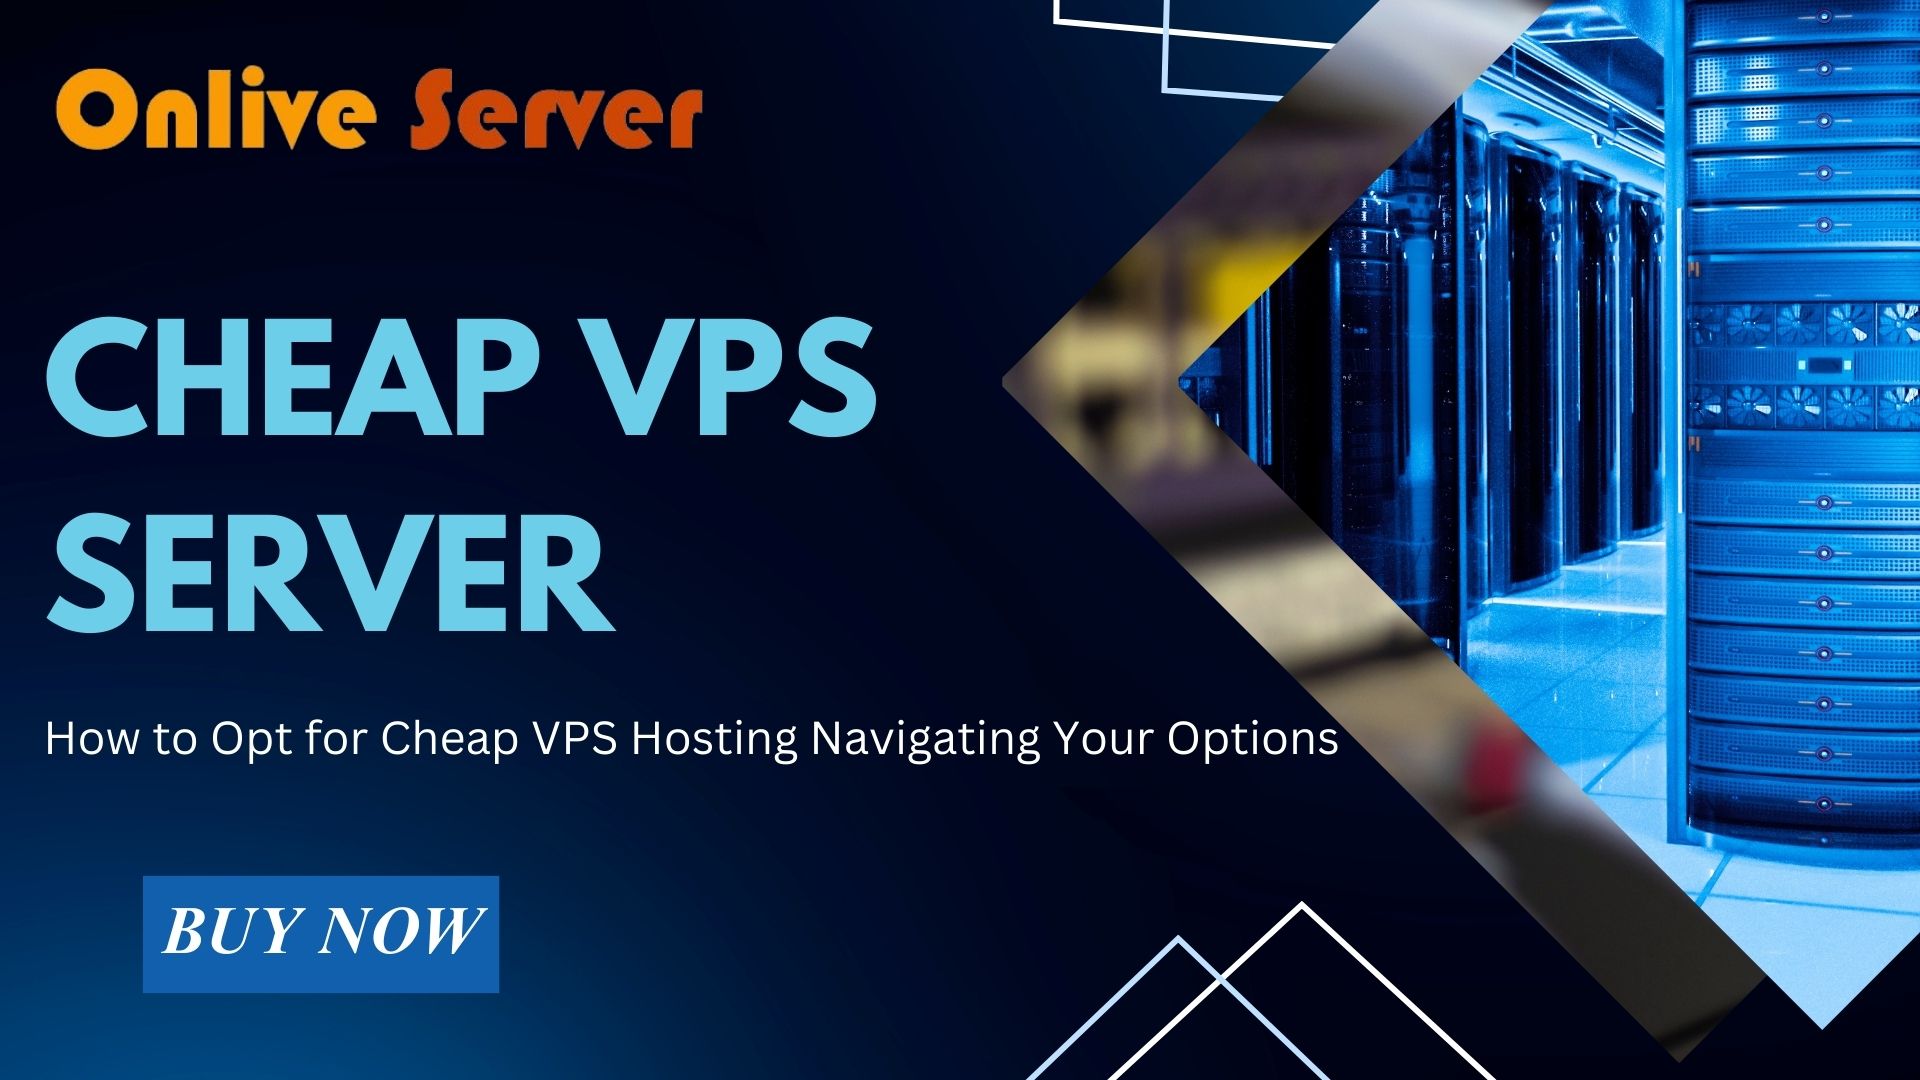 Get the Most Out of Your Cheap VPS Server with These Expert Tip